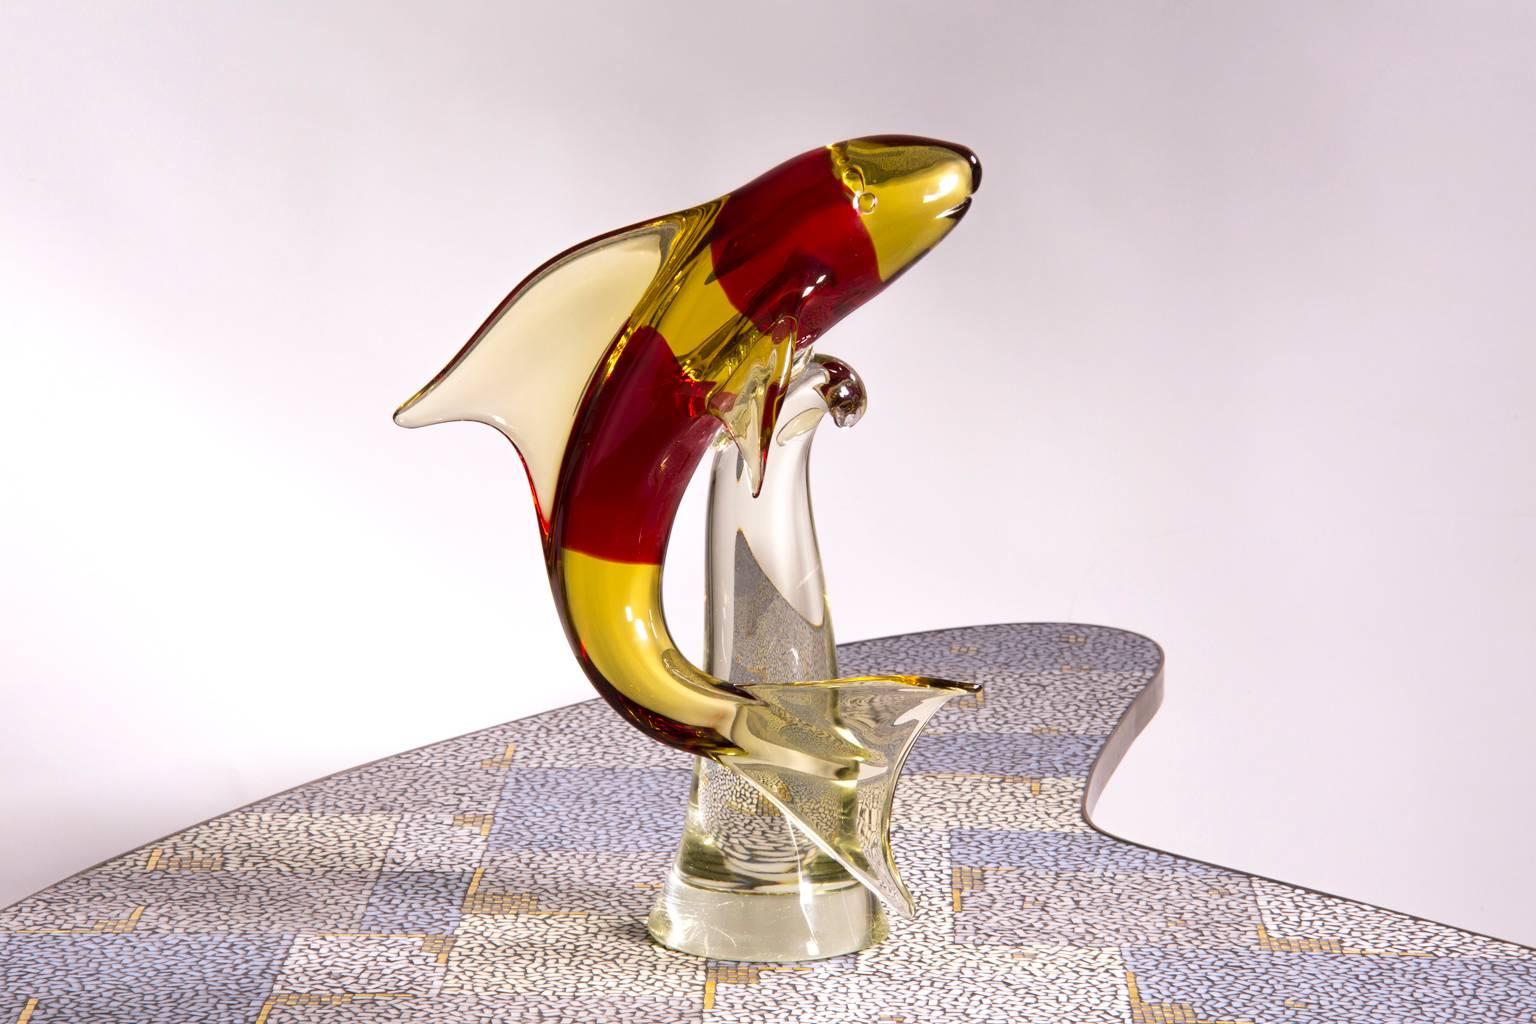 Very huge Murano glass dolphin sculpture, Italy 1970.